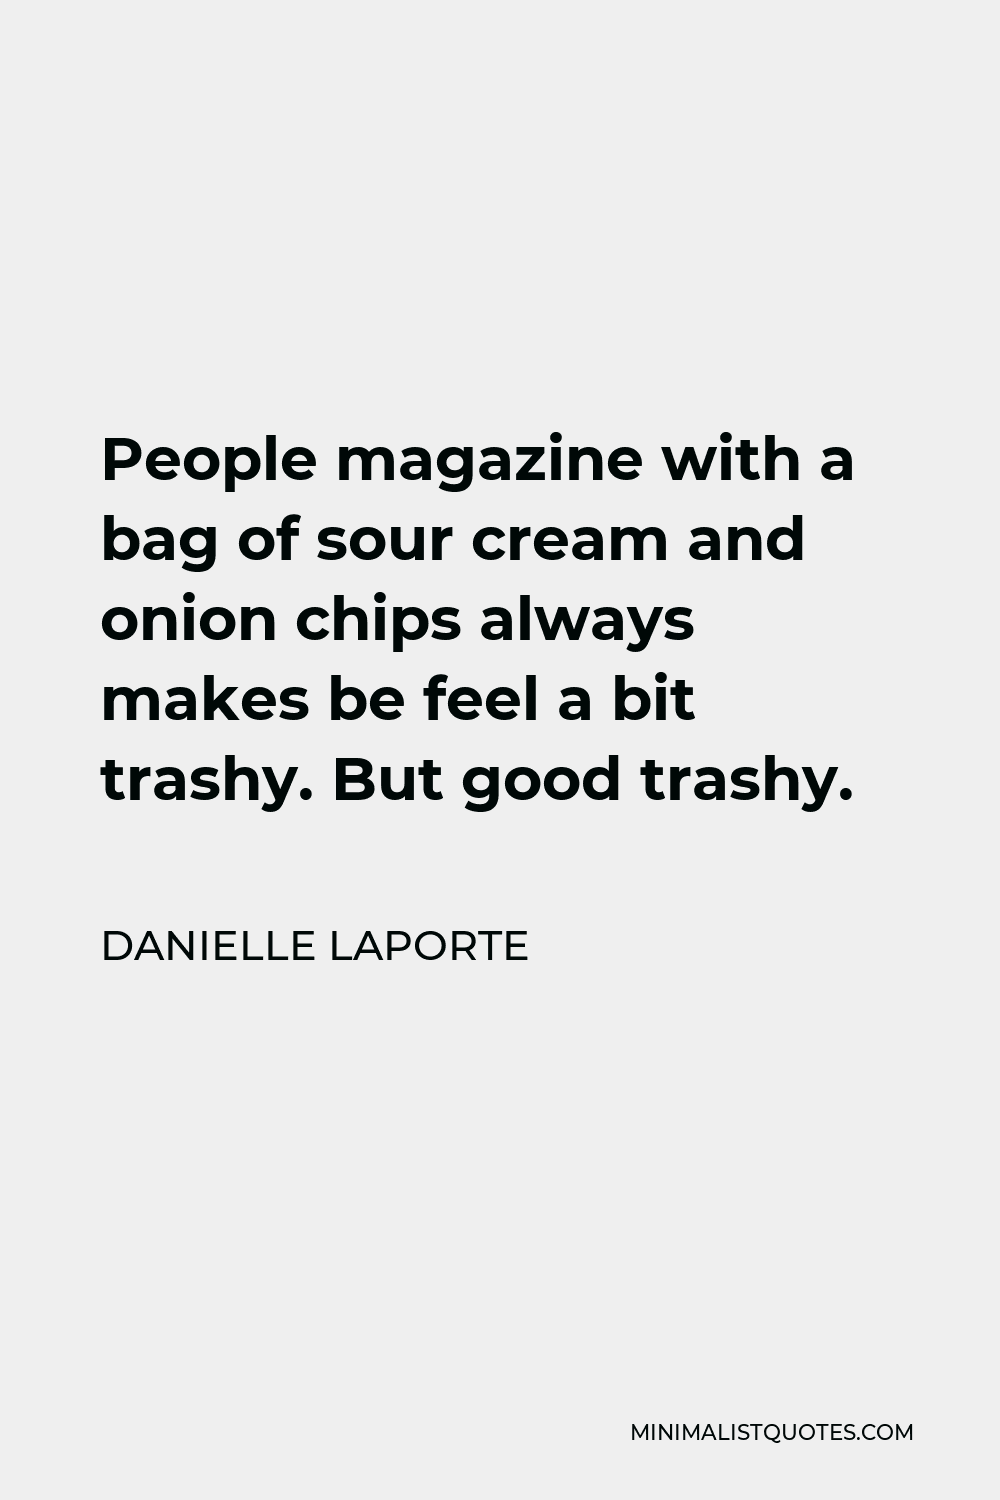 Danielle LaPorte Quote - People magazine with a bag of sour cream and onion chips always makes be feel a bit trashy. But good trashy.